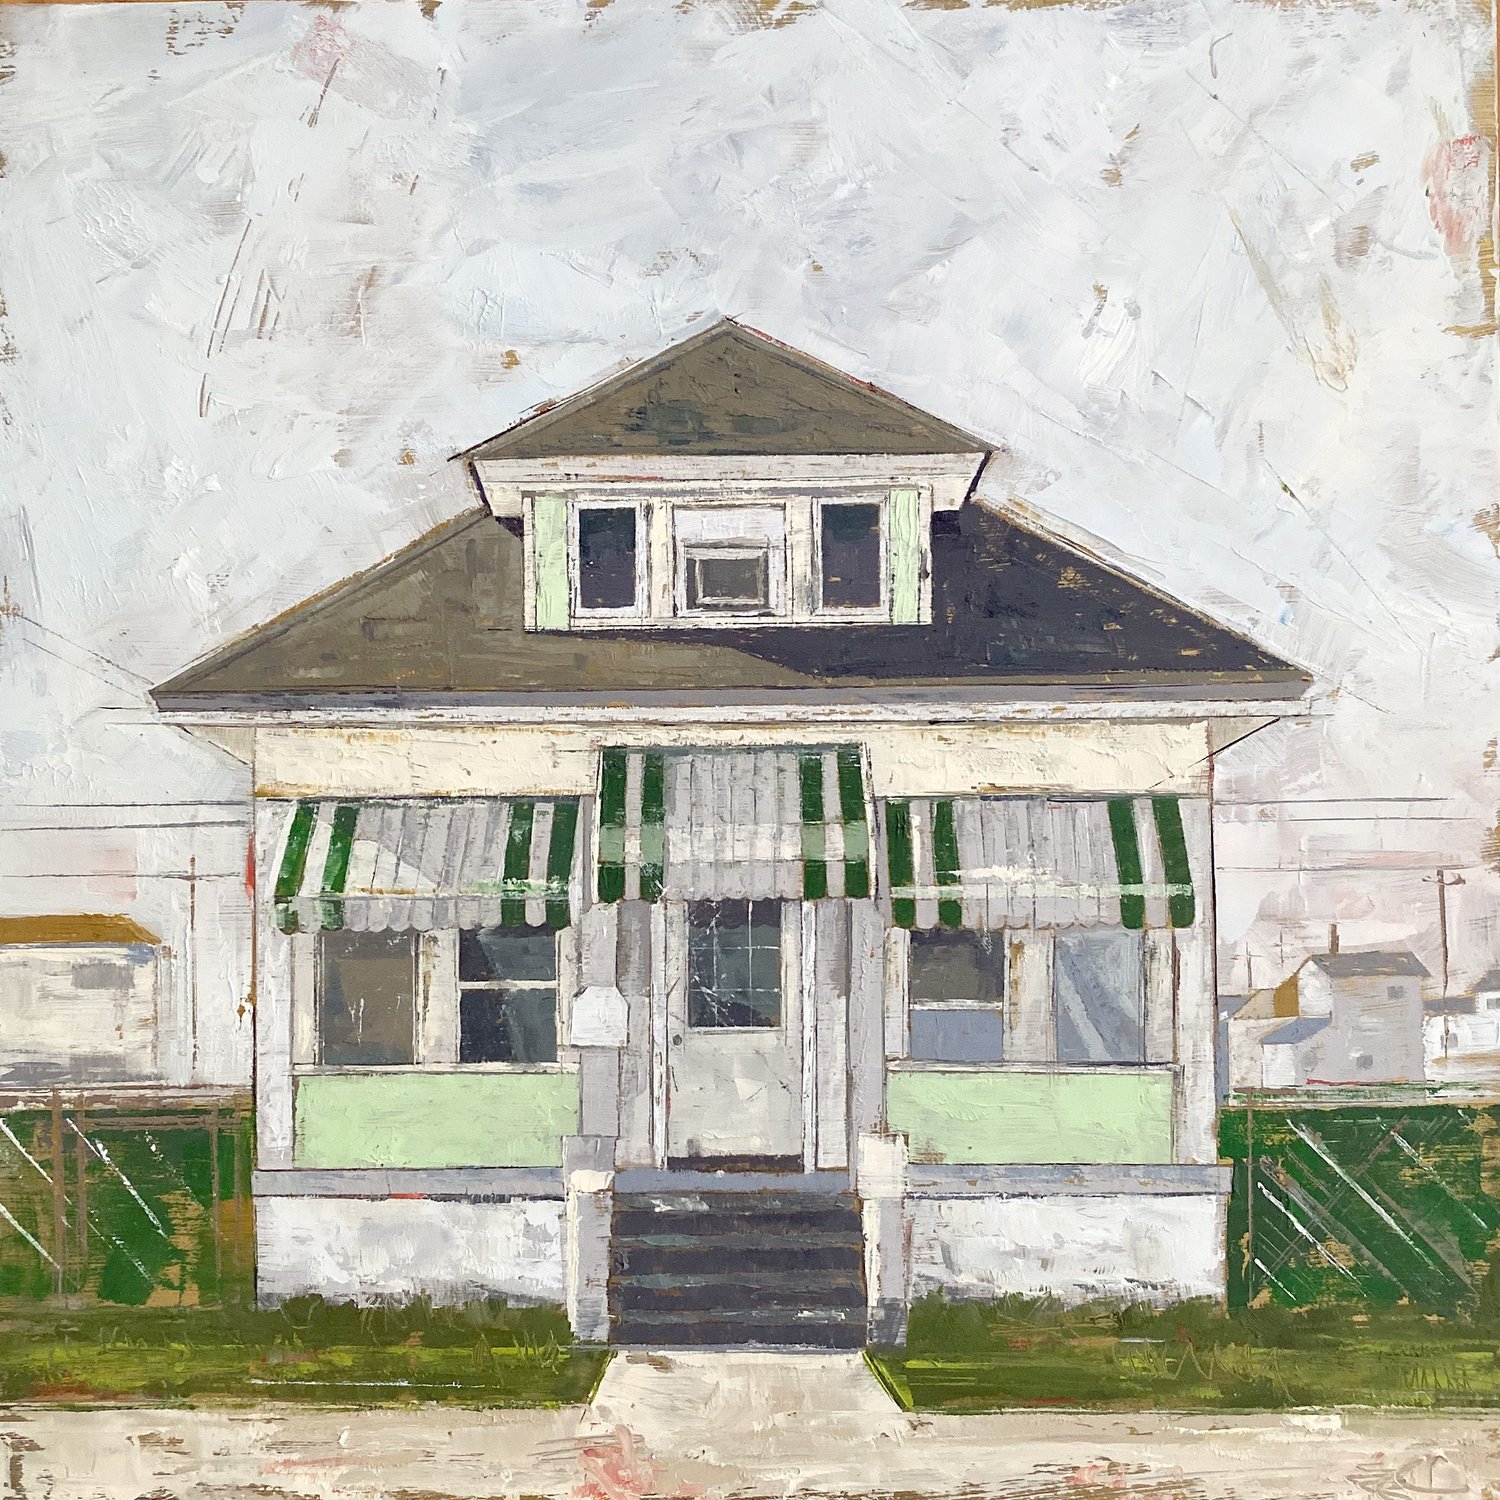 “Beach Bungalow” is an oil painting by Emily Thompson.